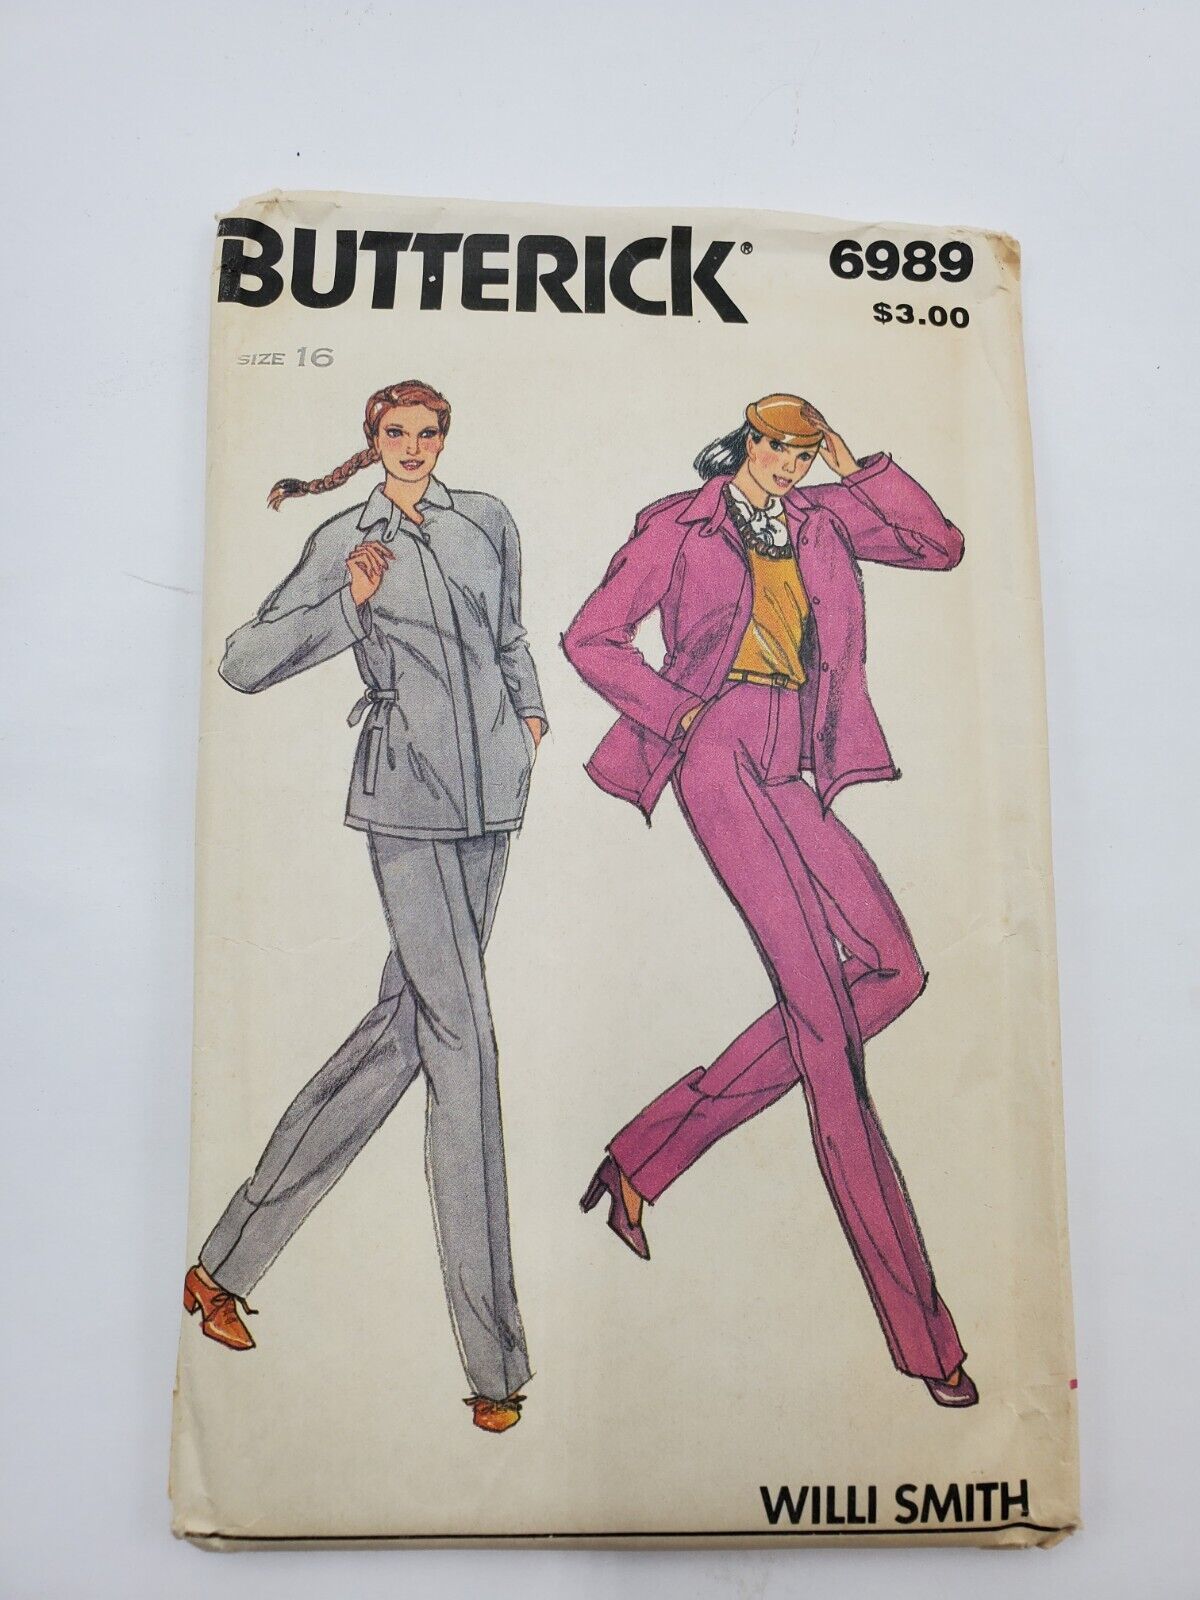 Butterick 6989 Sewing Pattern Misses Ladies Jacket and Pants Cut Vintage Size 16 - $7.88